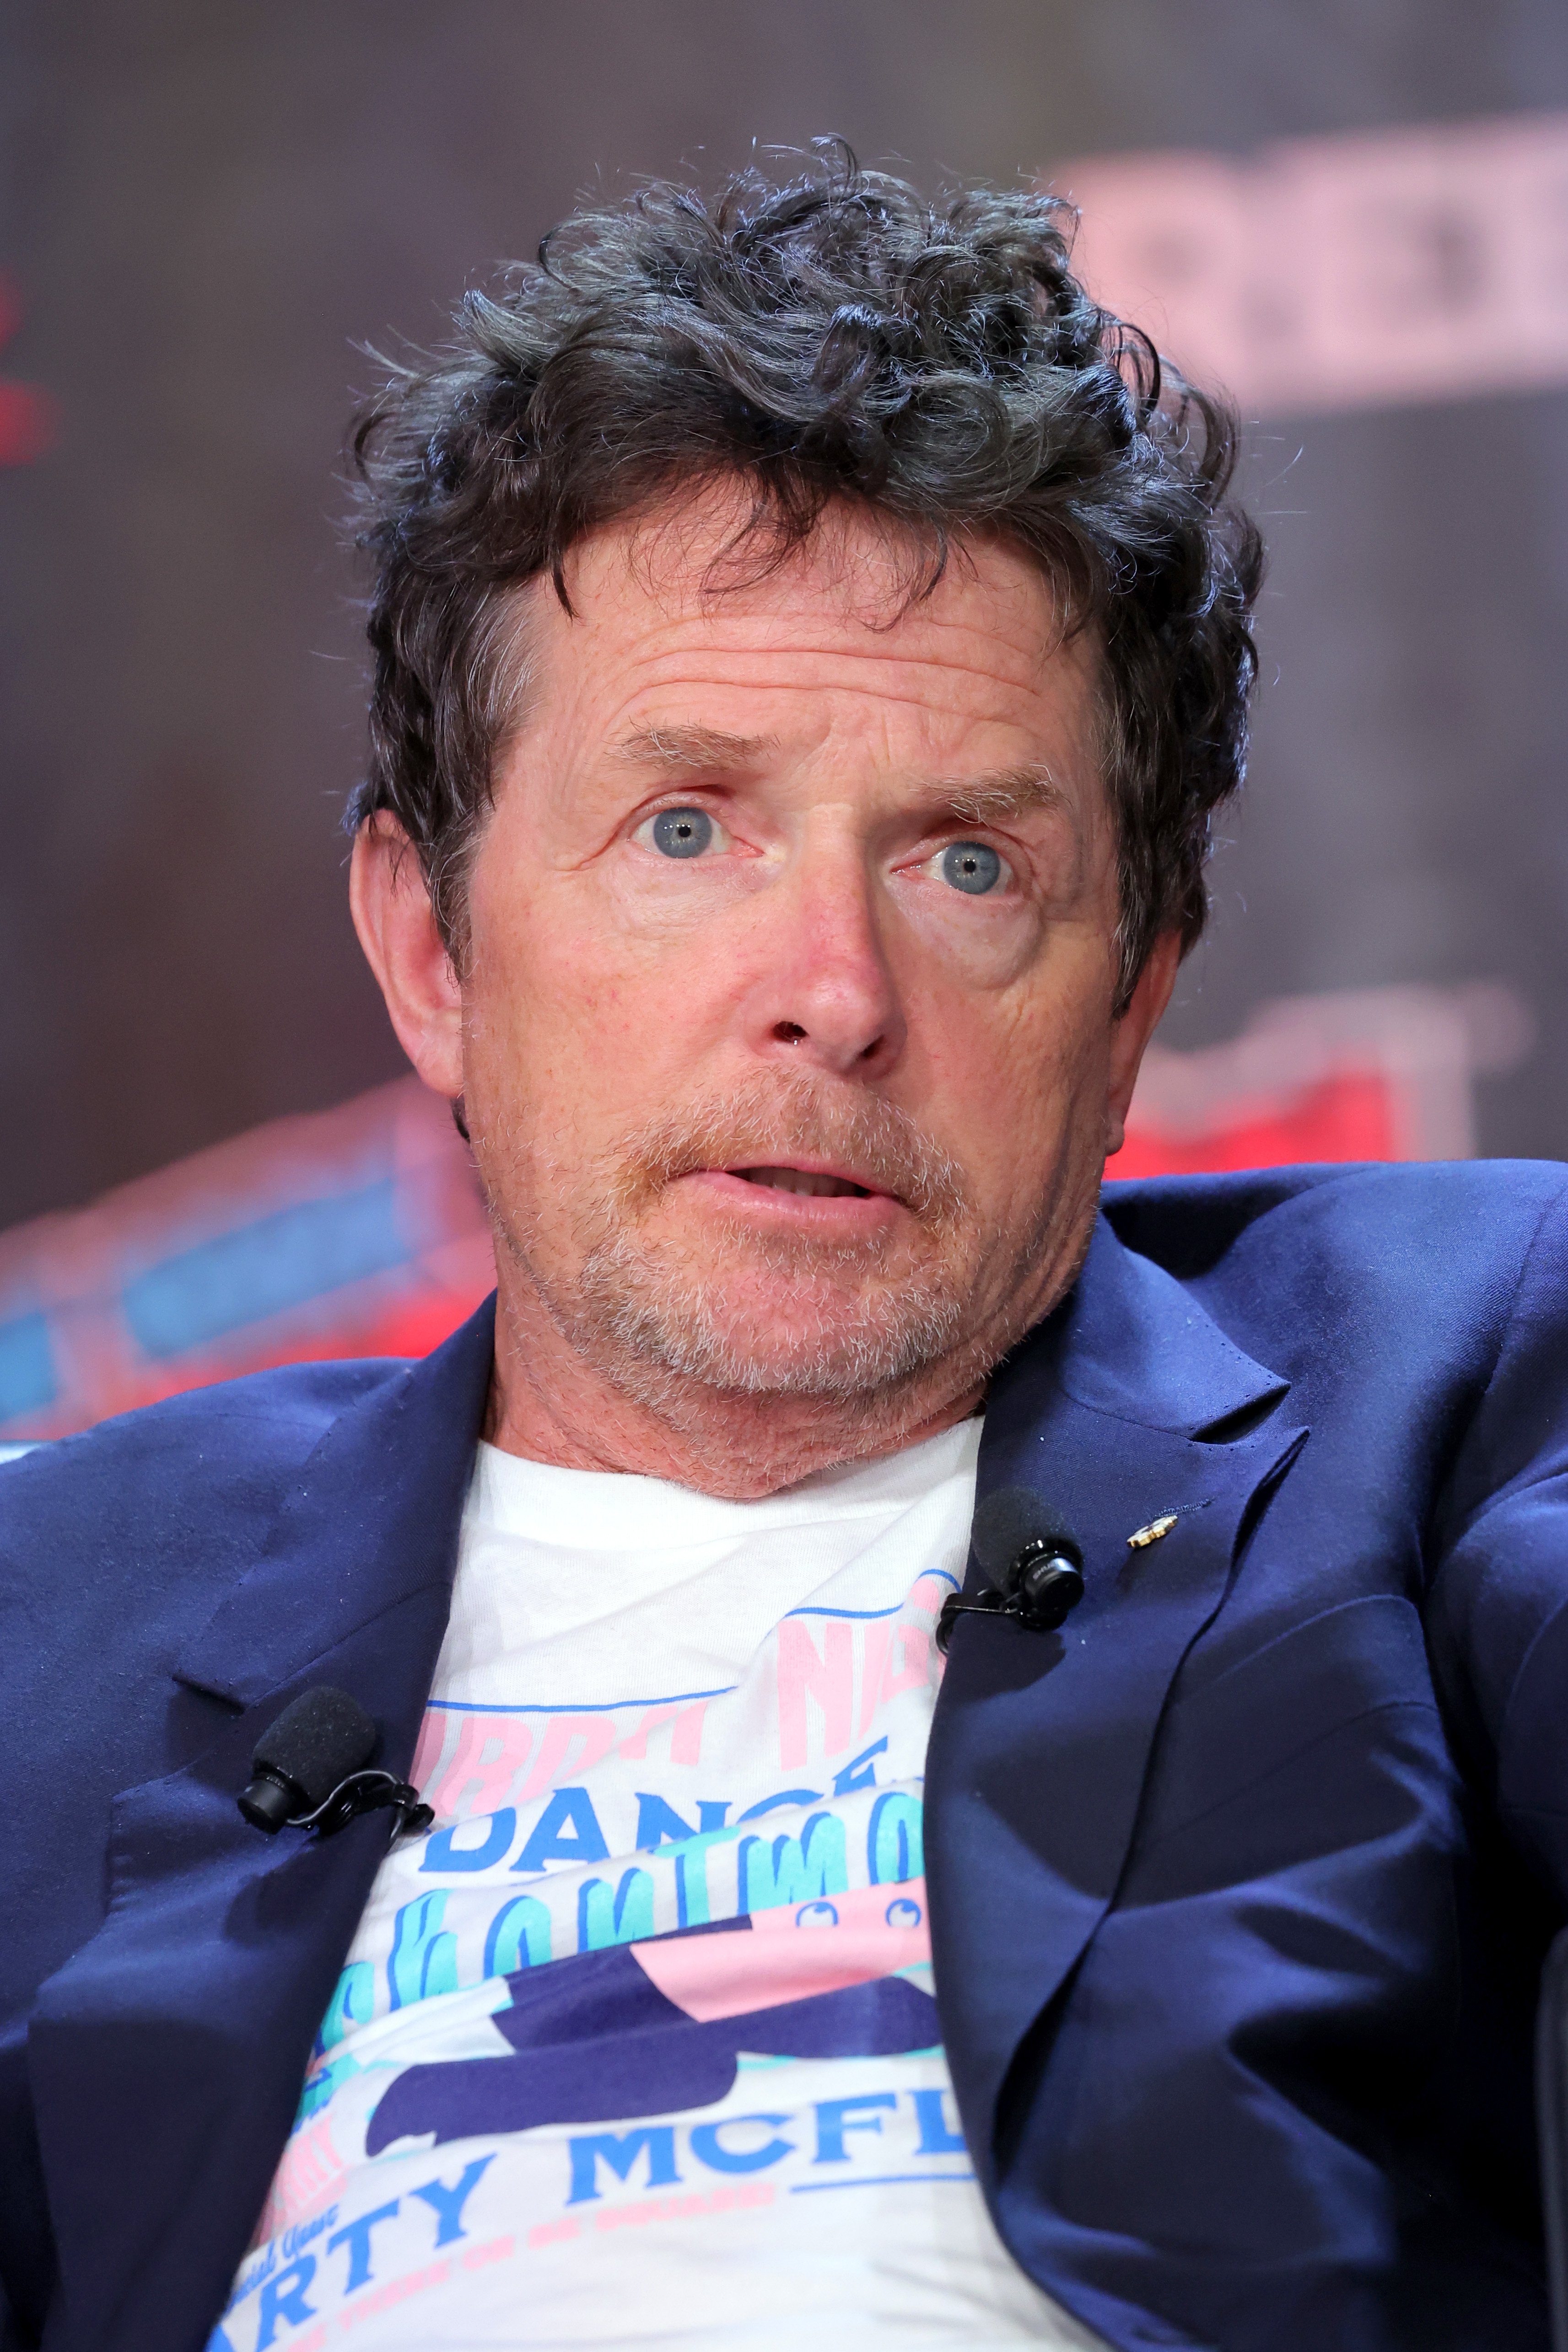 Actor Michael J. Fox speaks during a "Back To The Future Reunion" panel at New York Comic Con on October 08, 2022 in New York City. | Source: Getty Images